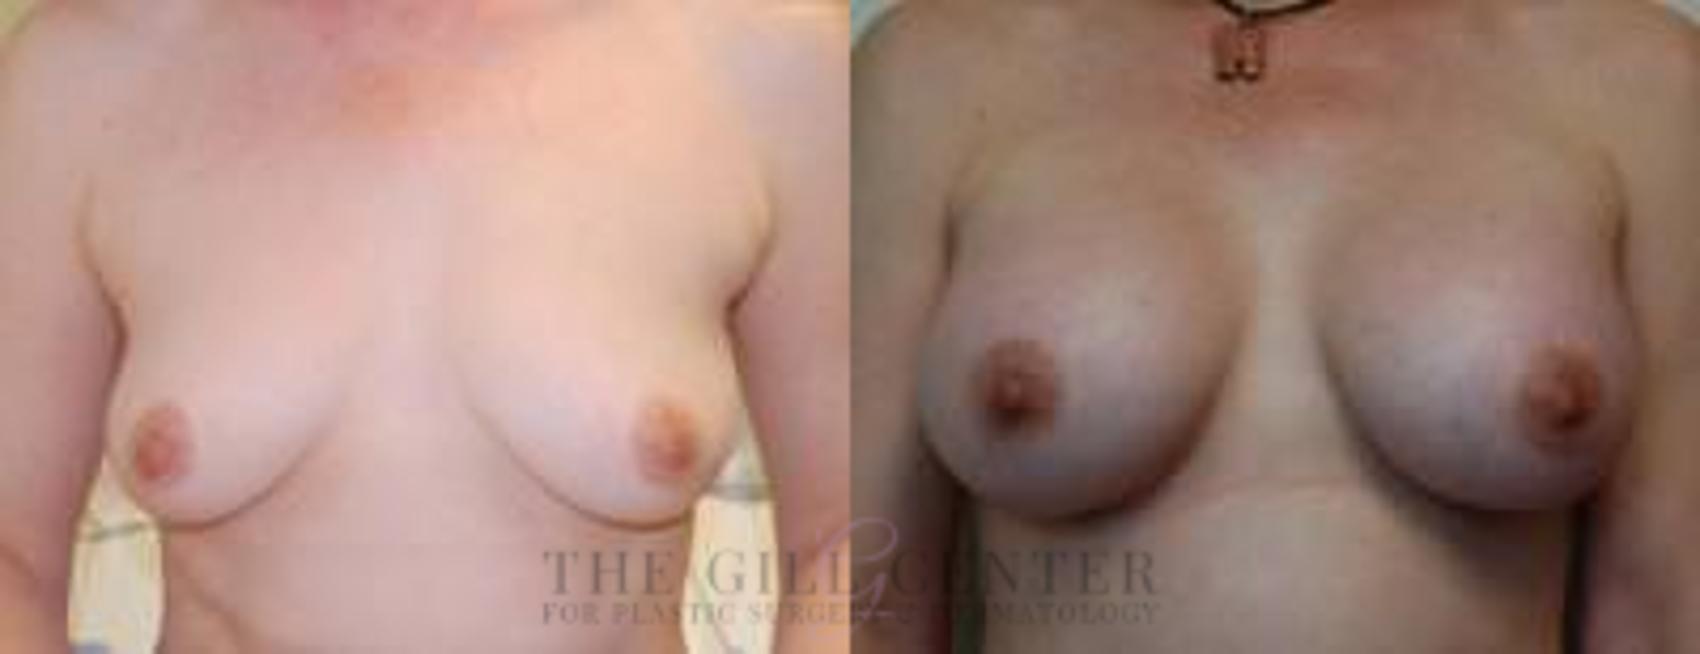 Breast Augmentation Case 60 Before & After Front | The Woodlands, TX | The Gill Center for Plastic Surgery and Dermatology